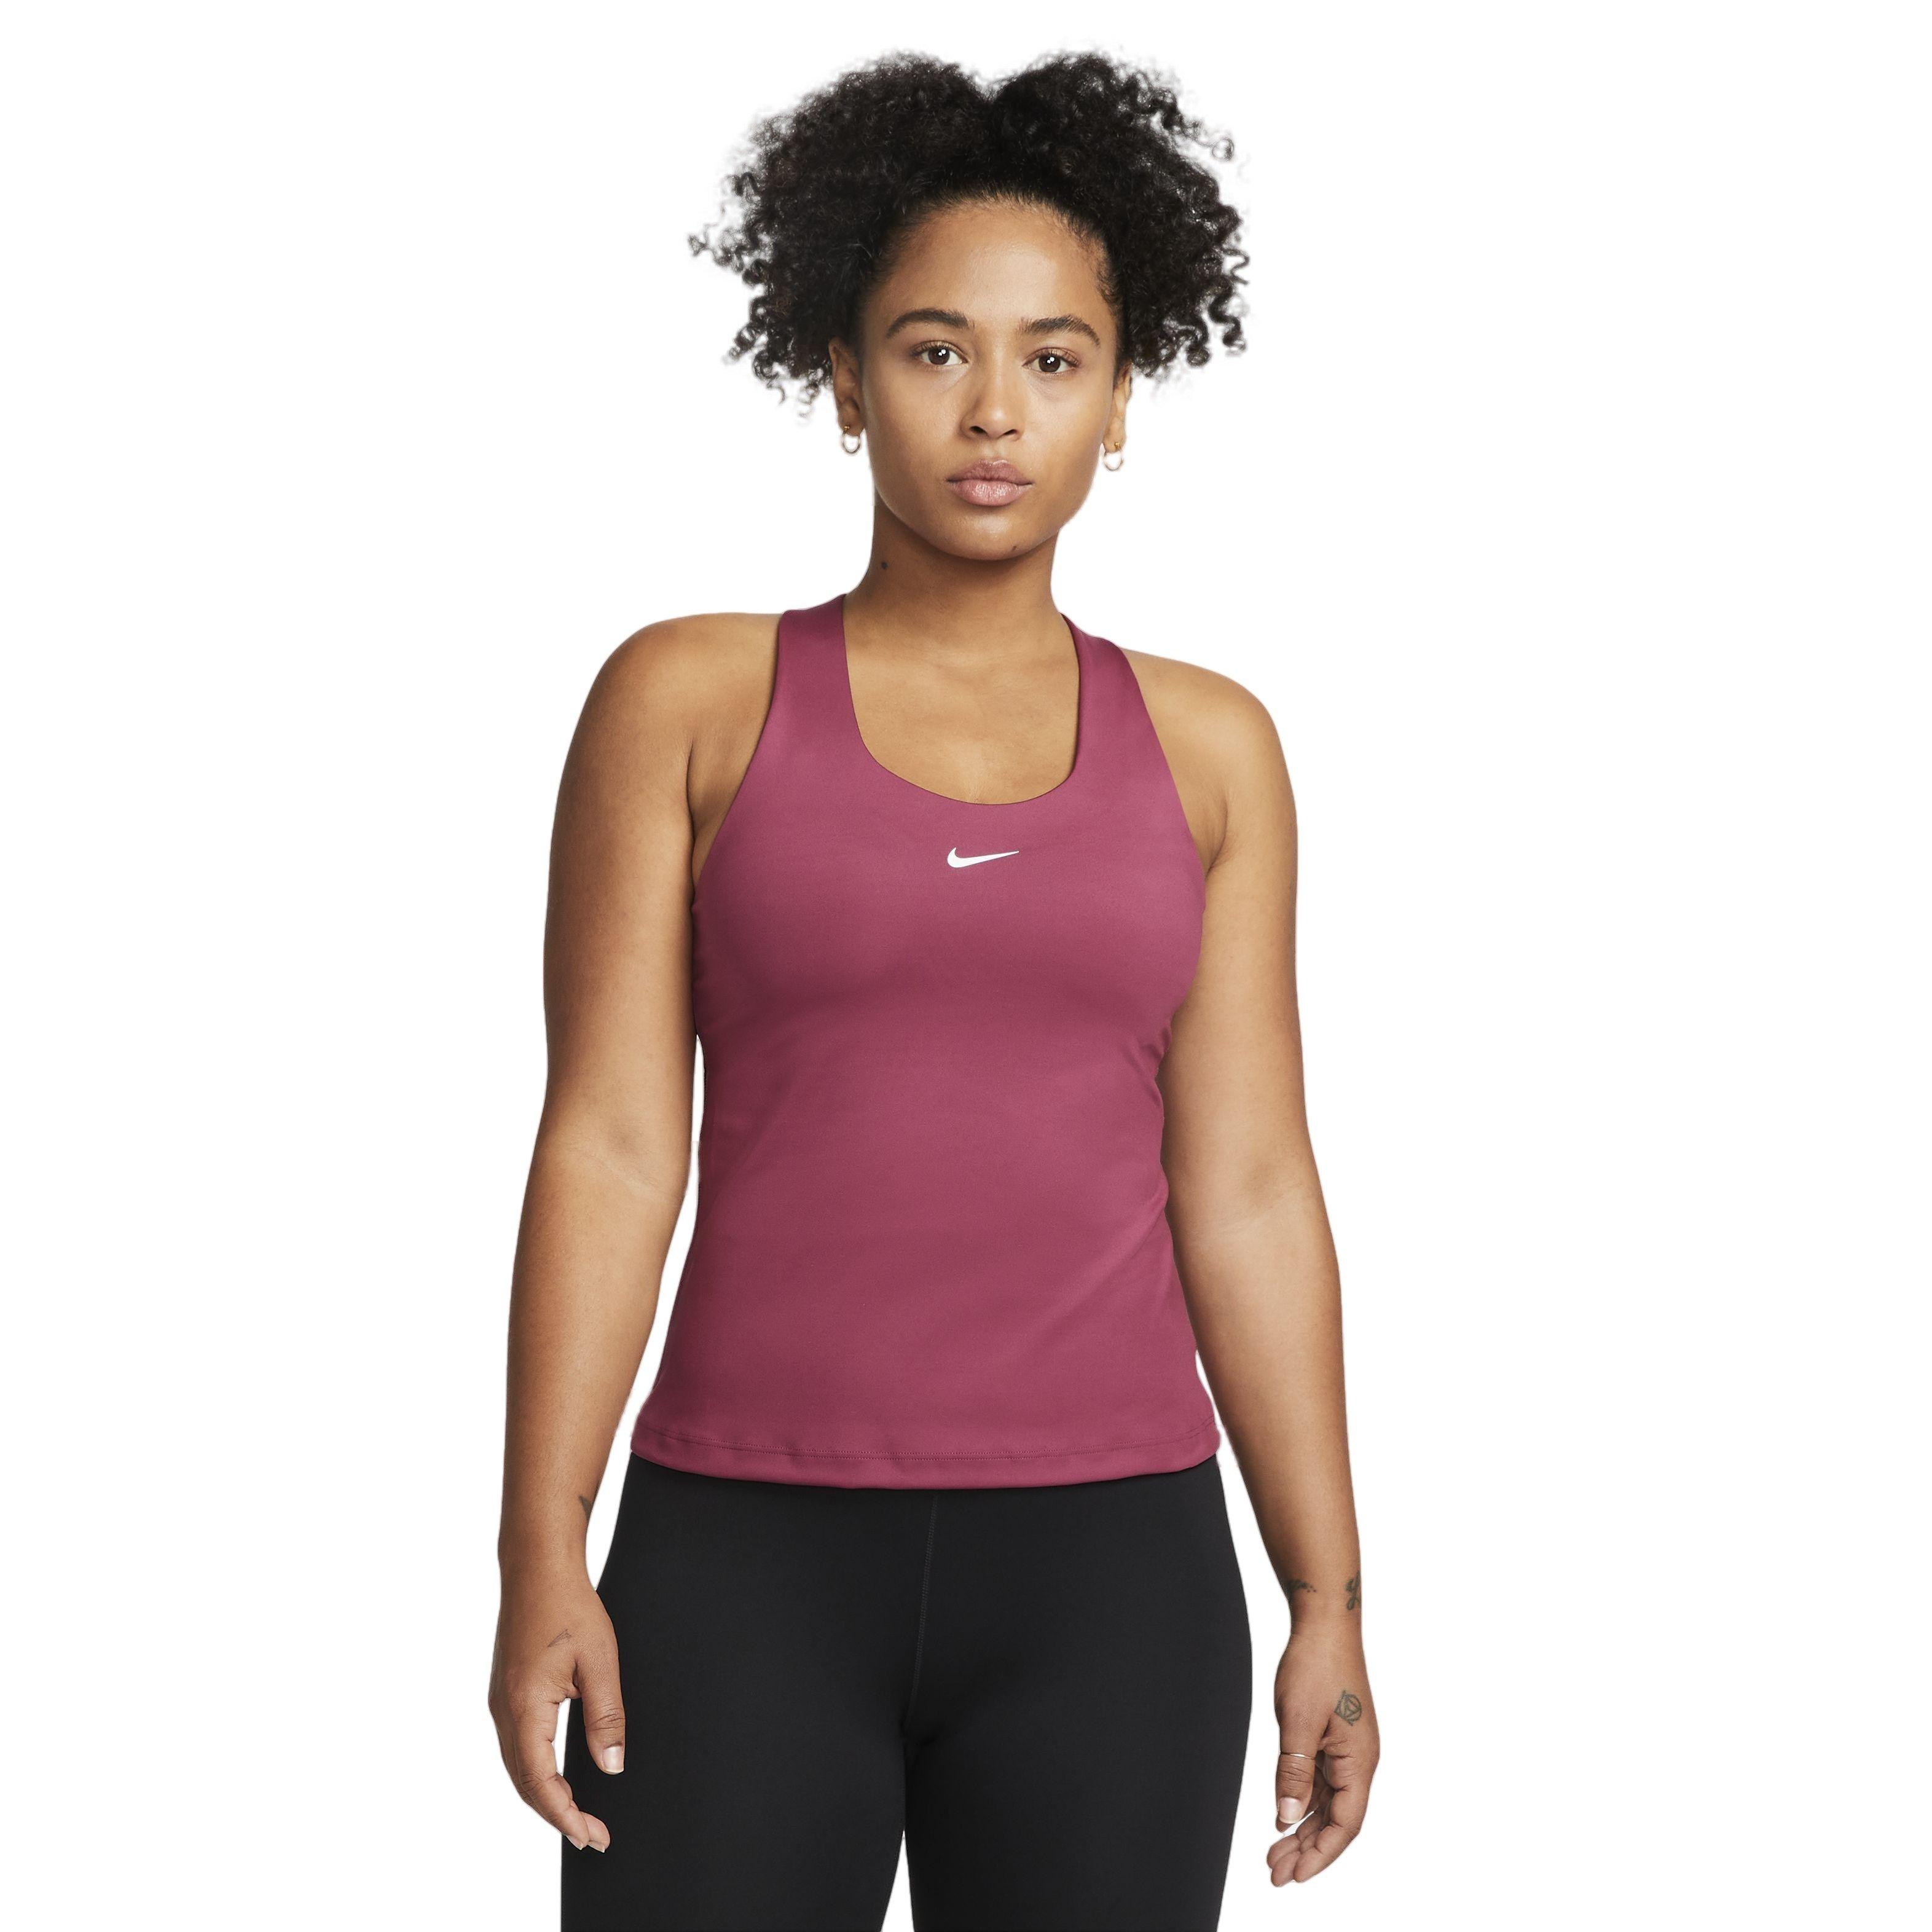 THE ICONIC - Women's Nike Pro Classic Swoosh Cooling Sports Bra Shop it now  >